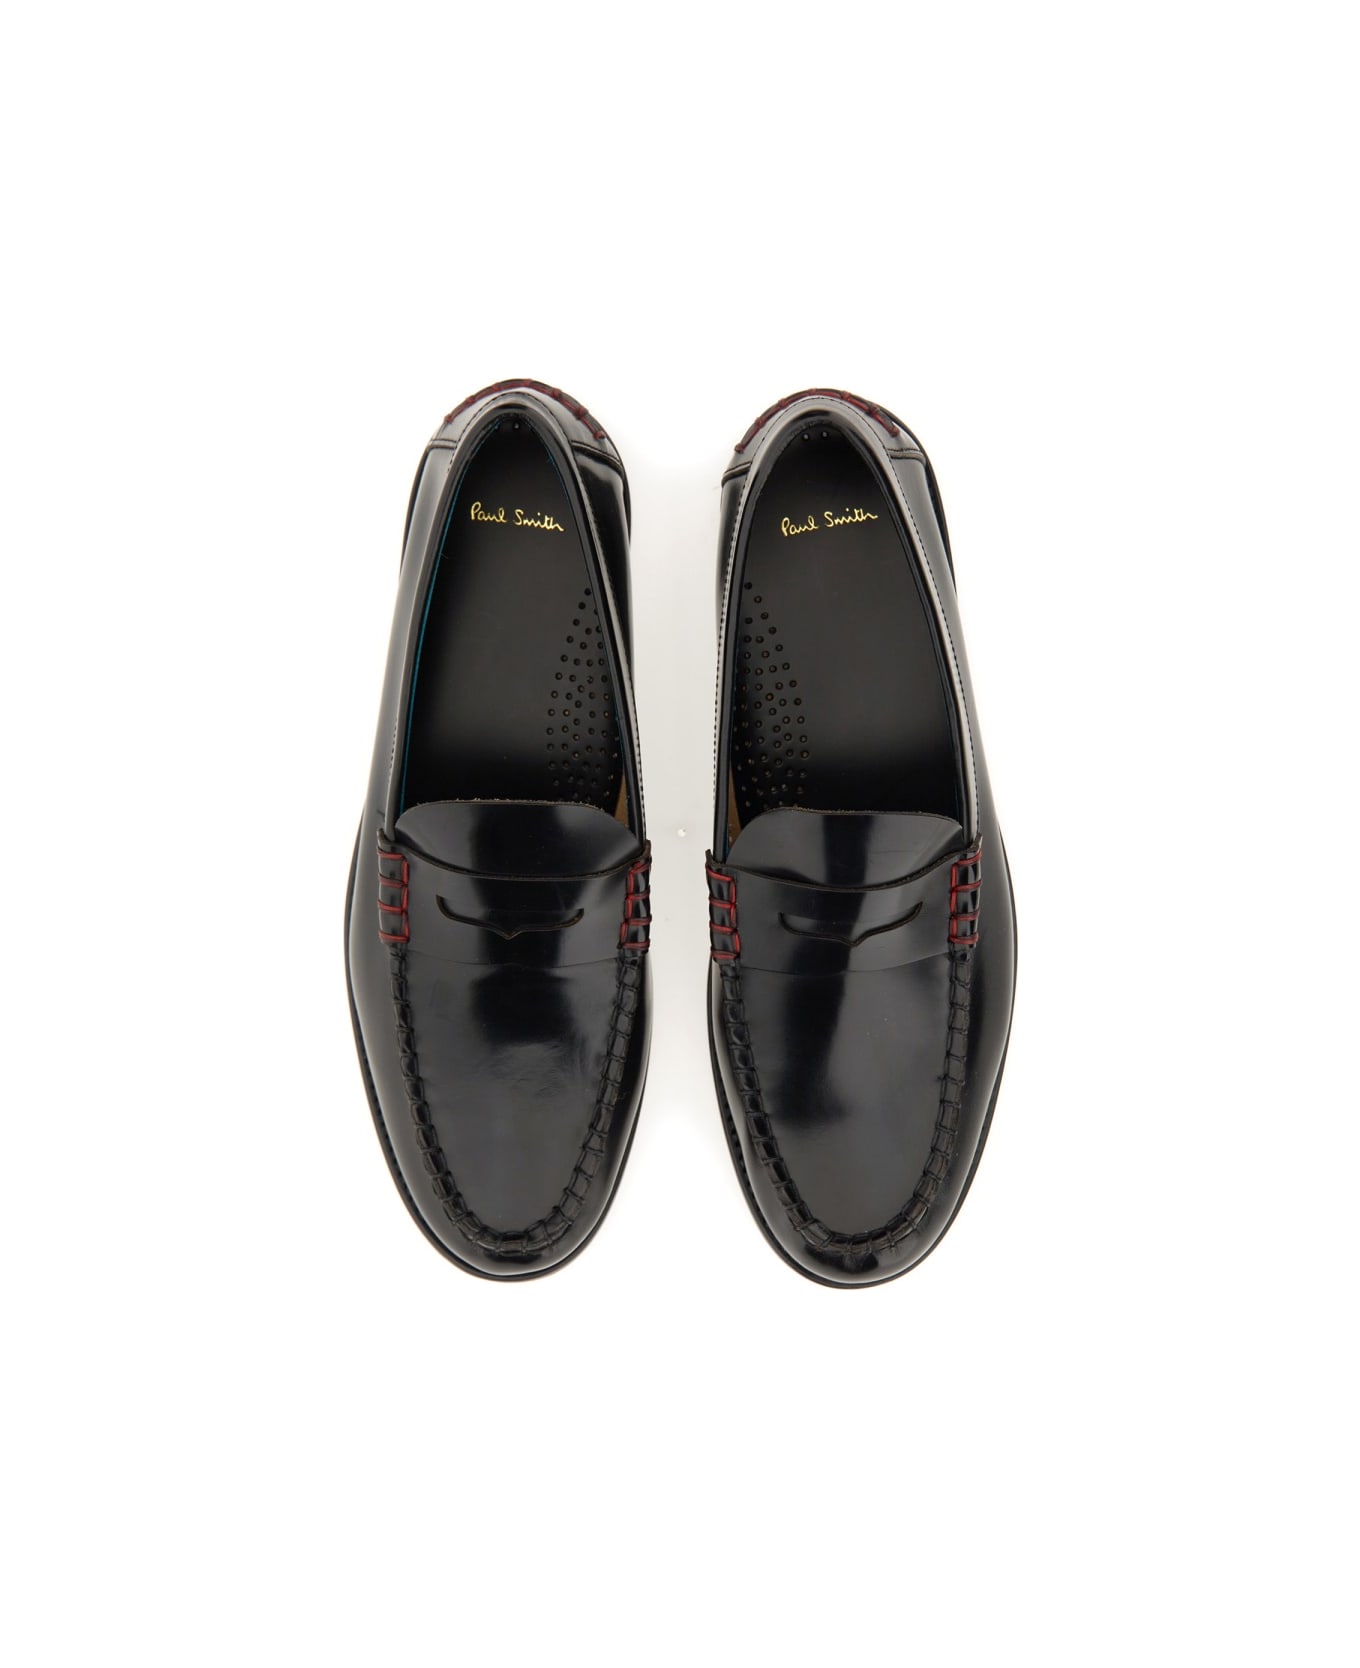 Paul Smith Leather Loafer - BLACK フラットシューズ